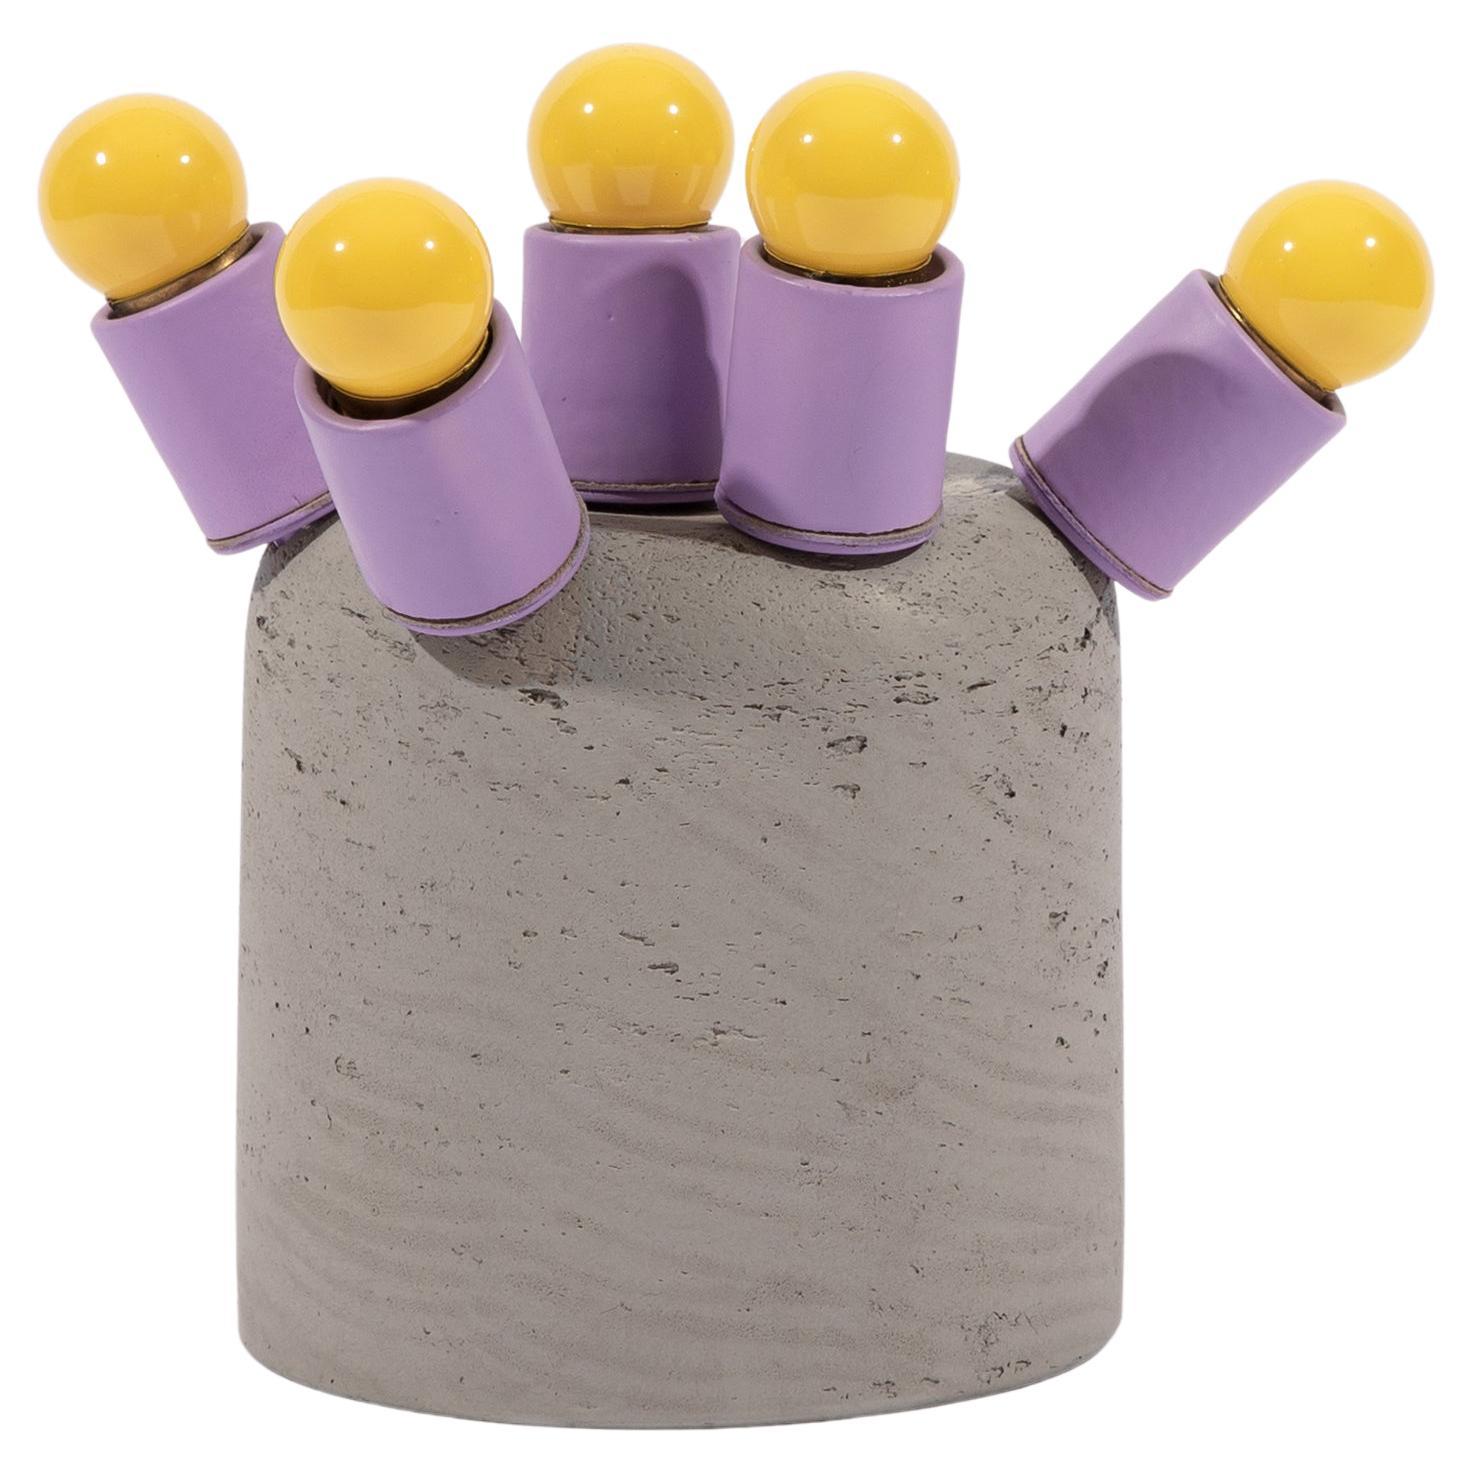 Playful Purple and Yellow Concrete Contemporary Table Lamp by Nusprodukt